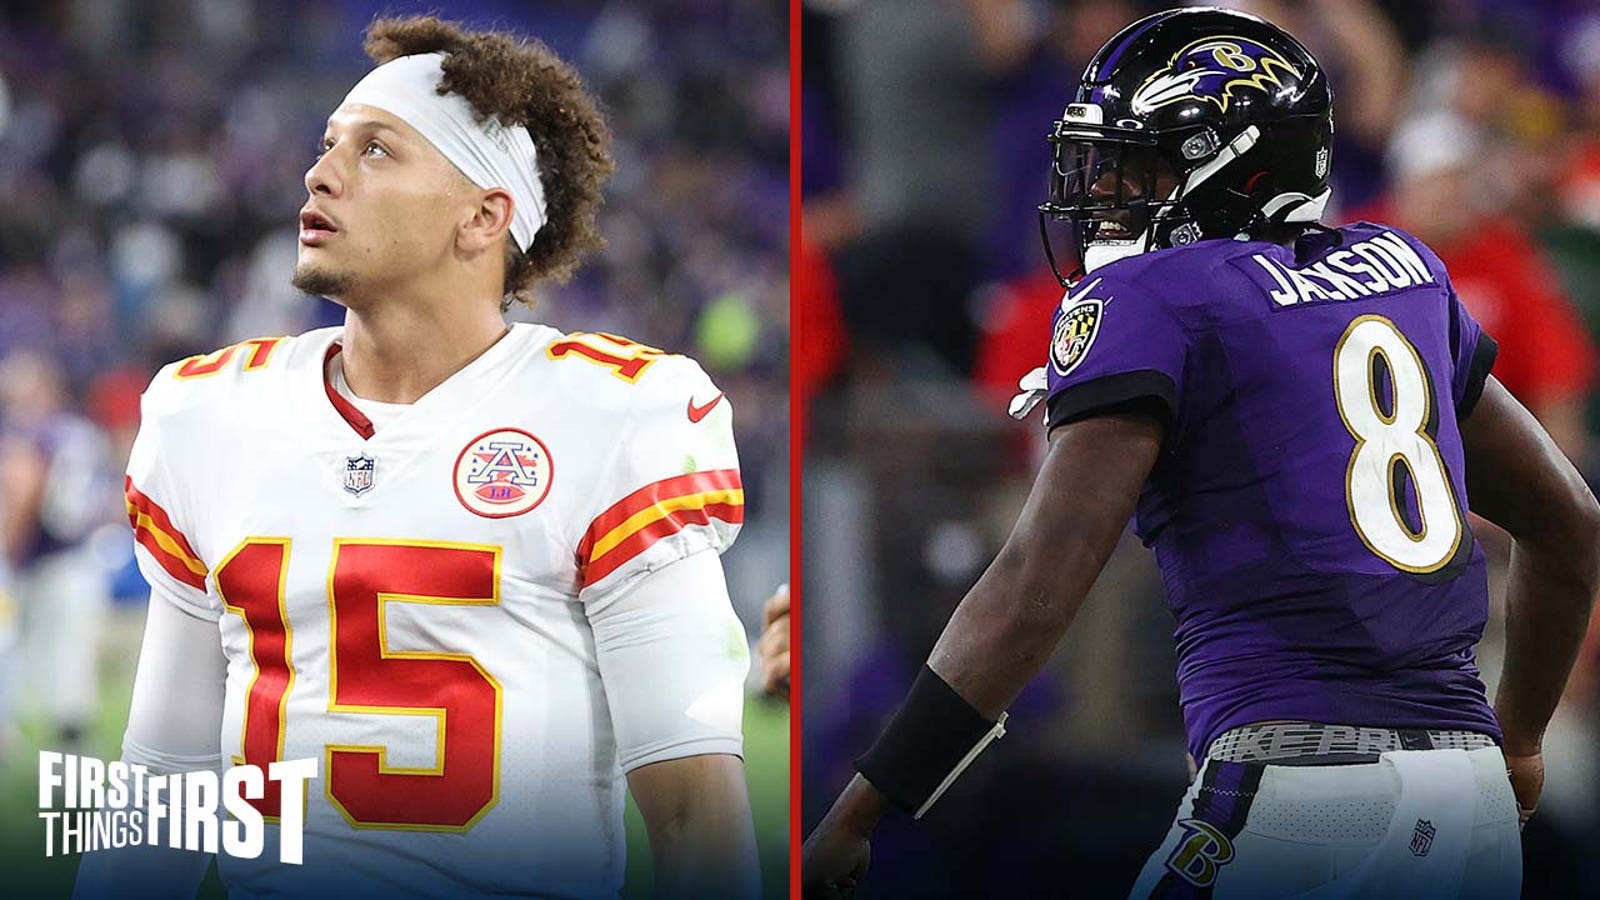 Nick Wright is in physical pain after his Chiefs fall to the Ravens, 36-35 I FIRST THINGS FIRST